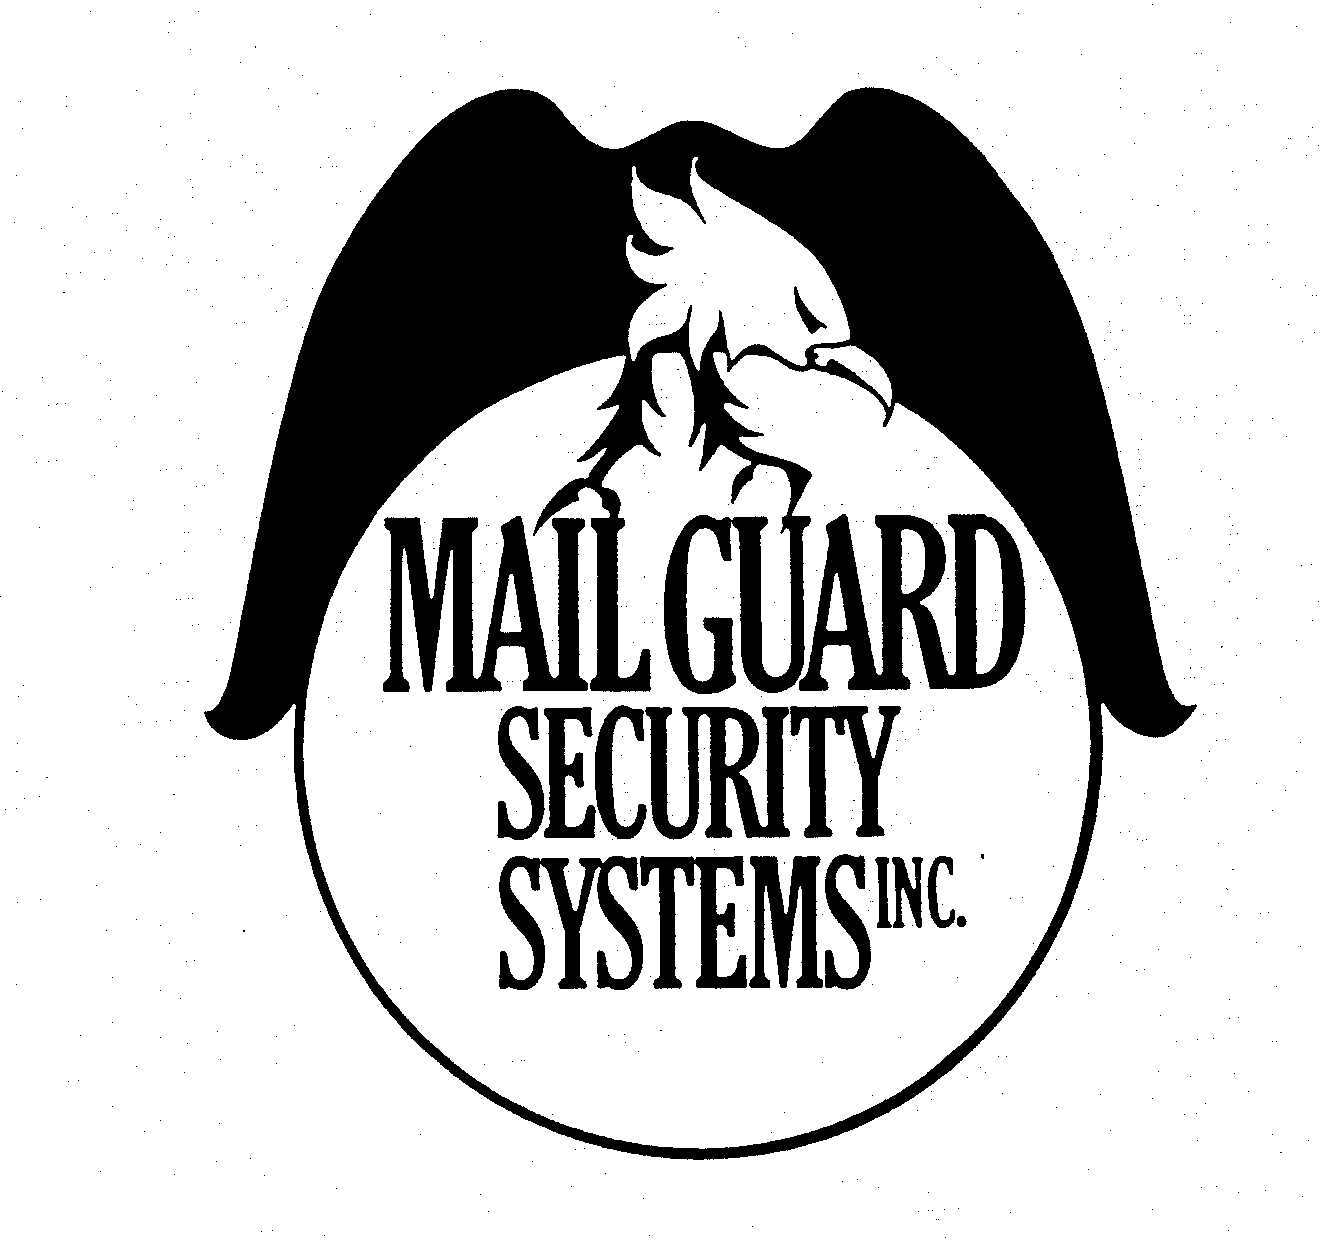 Trademark Logo MAILGUARD SECURITY SYSTEMS INC.